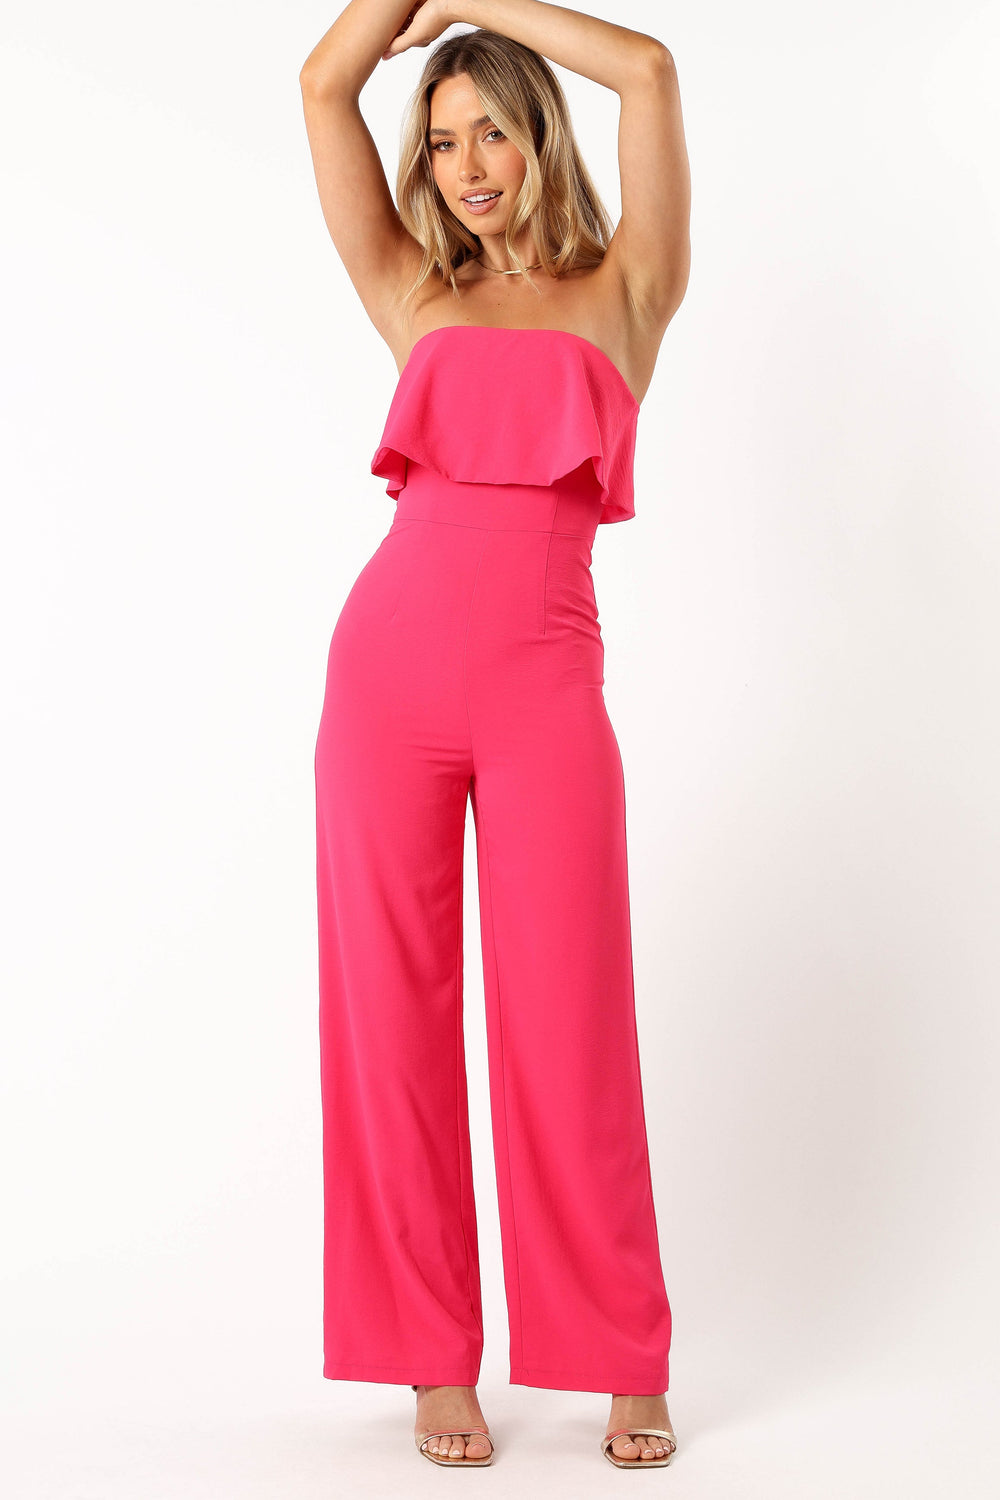 Petal and Pup USA Rompers Annabella Strapless Jumpsuit - Hot Pink